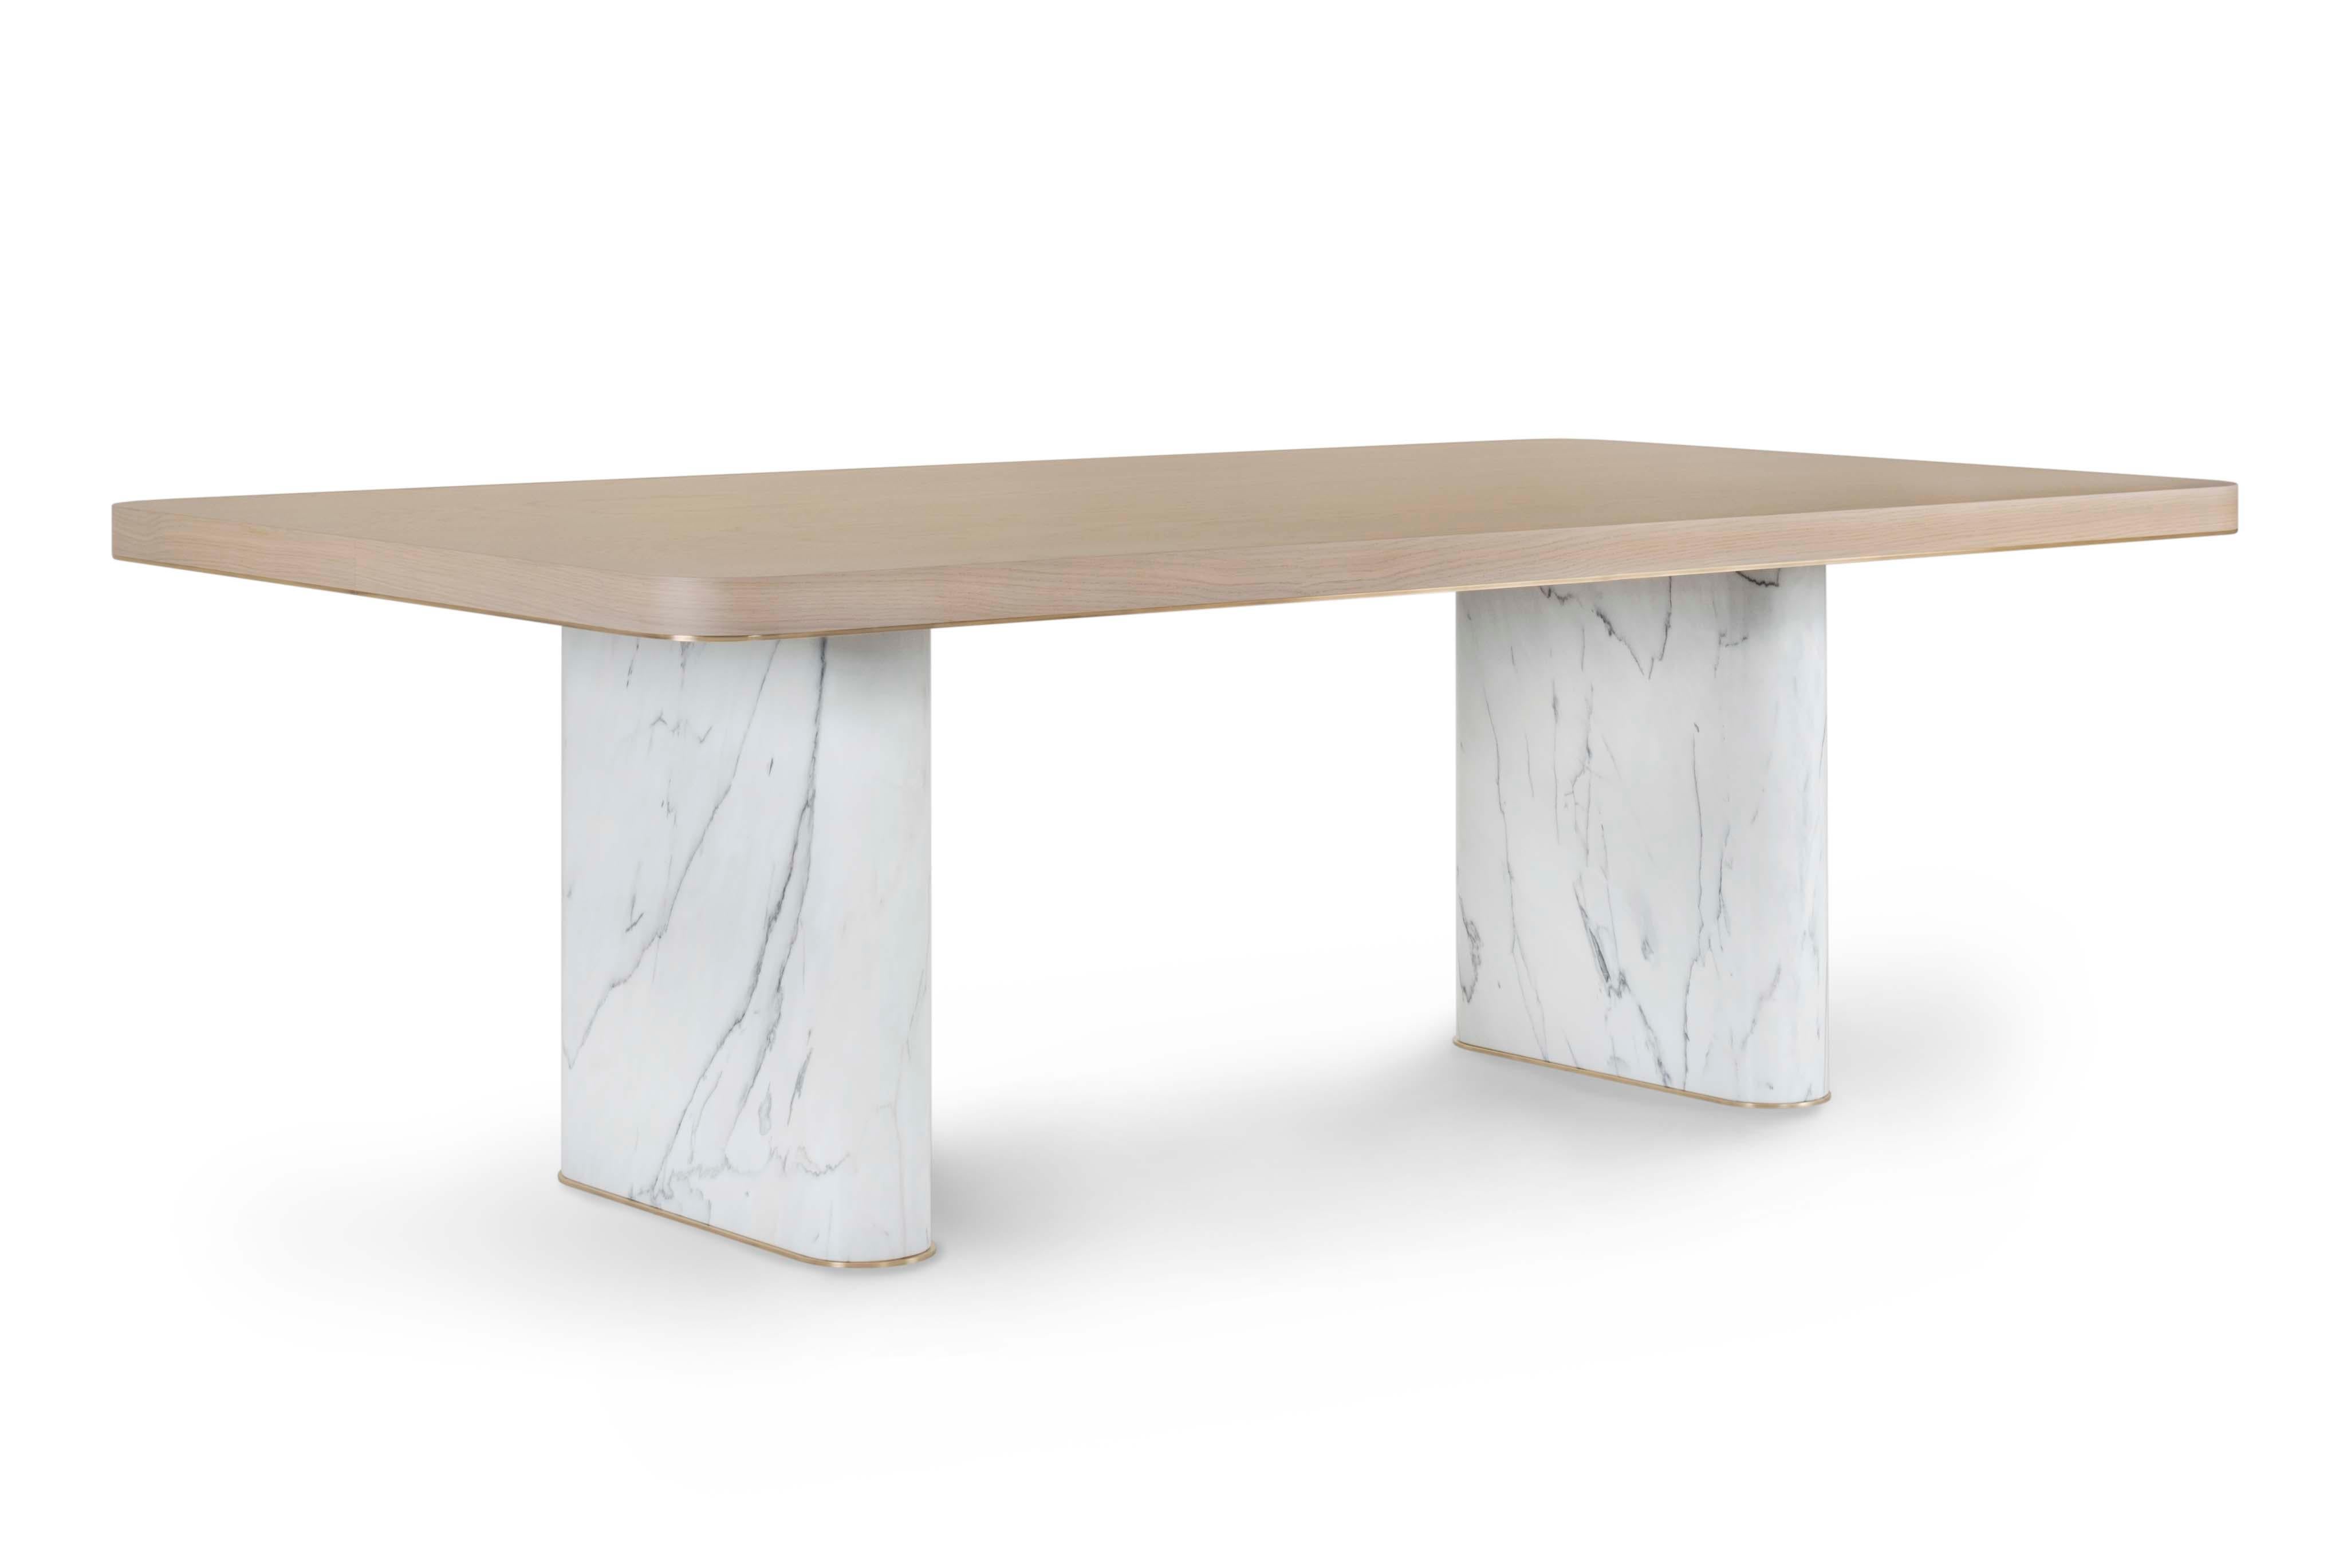 21st Century Modern Fall Dining Table Handcrafted in Portugal by Greenapple